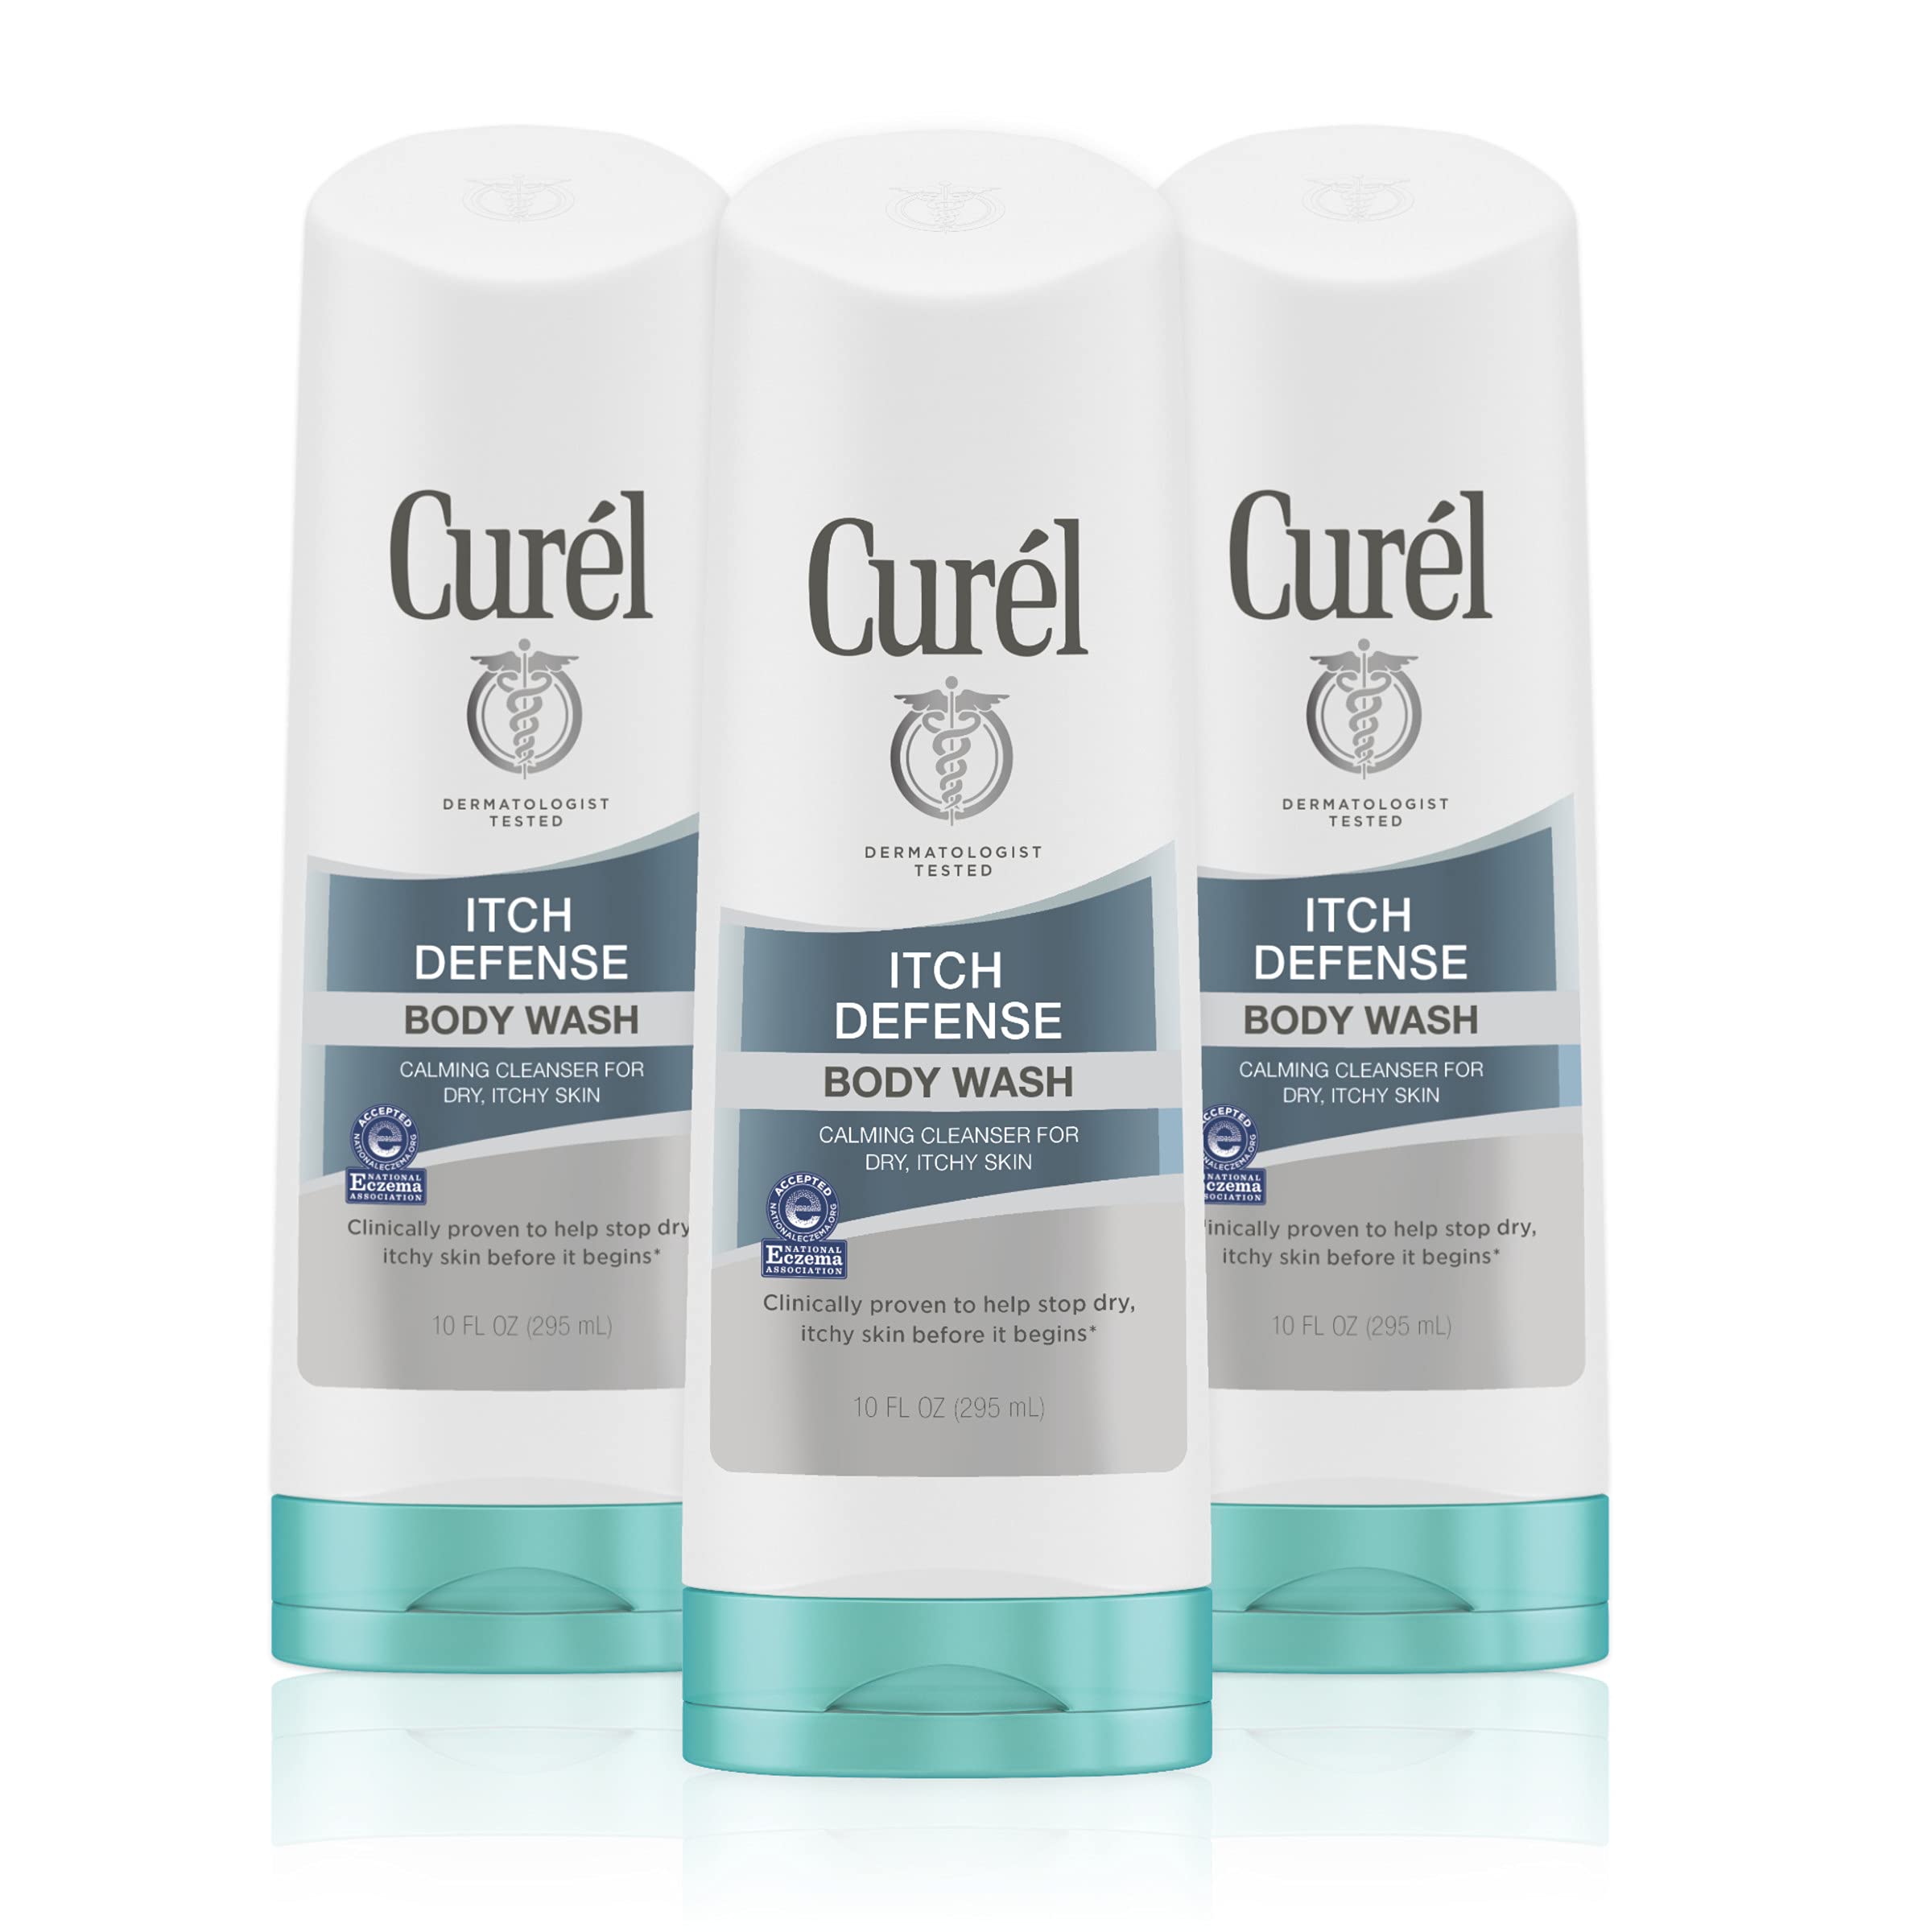 Curel Itch Defense Calming Body Wash, Soap-free Gentle Formula, for Dry, Itchy Skin, with Hydrating Jojoba and Olive Oil, 10 oz (Pack of 3)